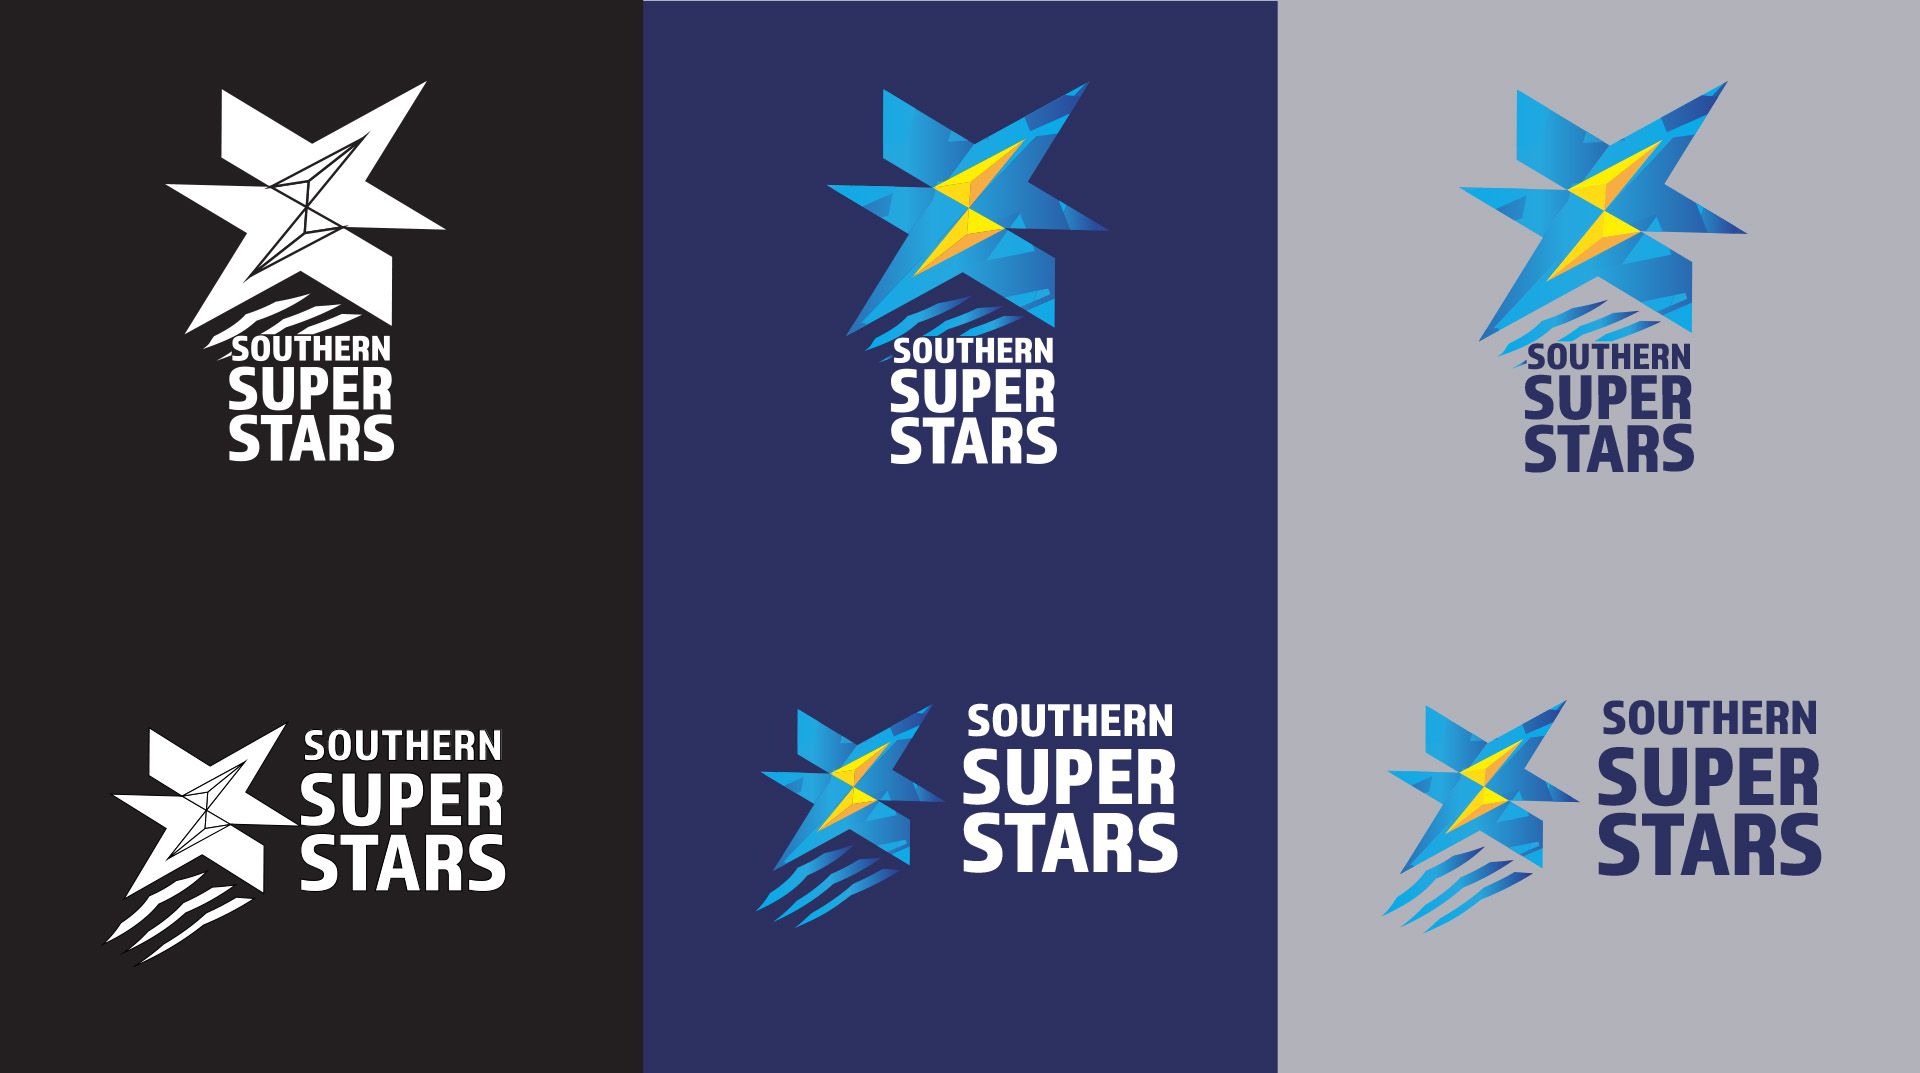 southern super stars Image - Signatures1